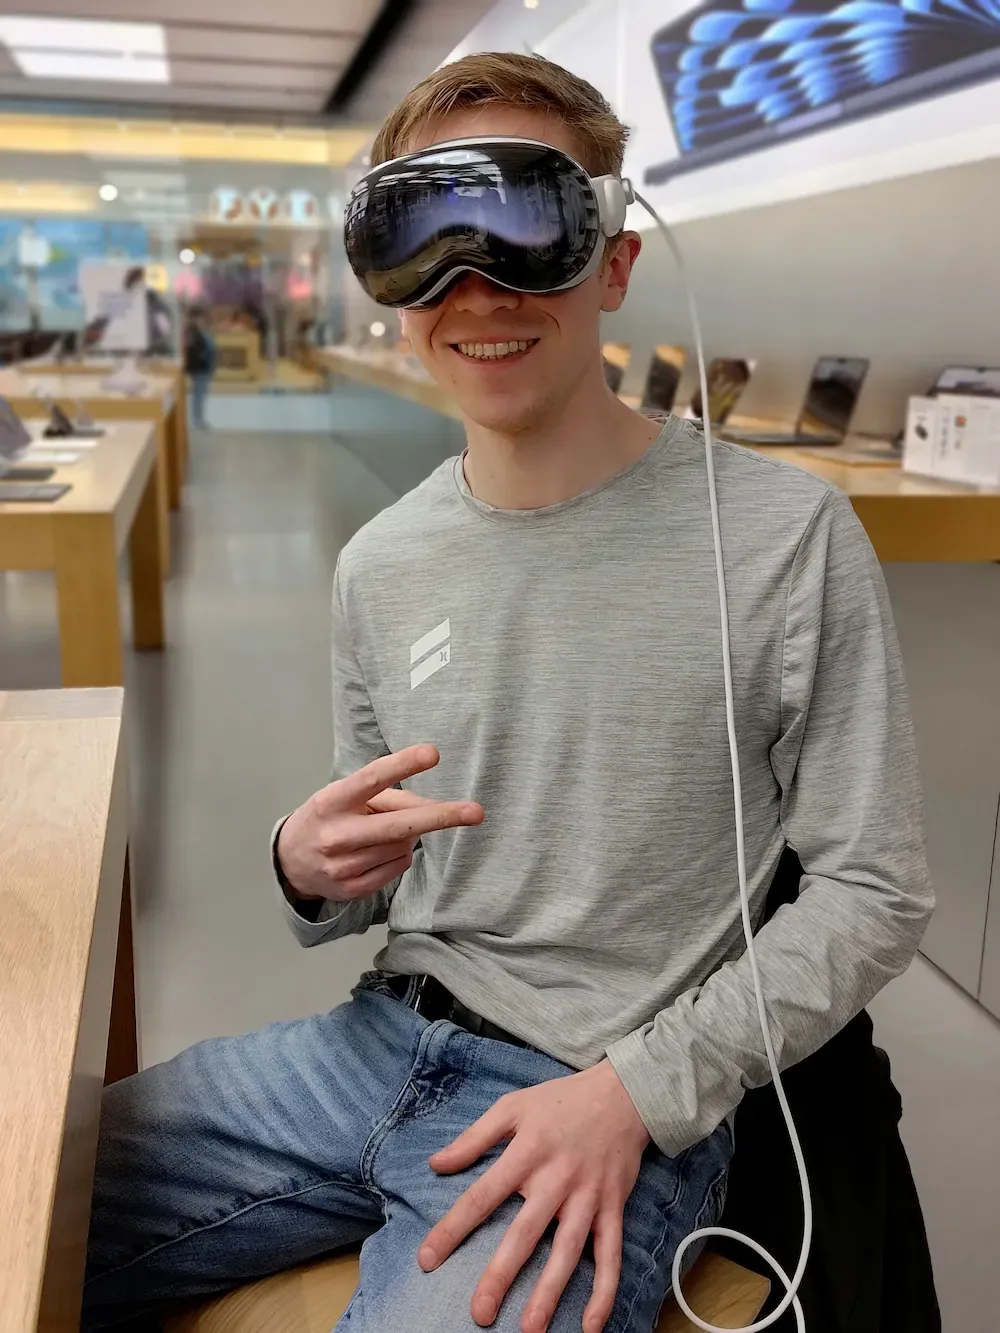 Matt seated in an Apple store wearing Vision Pro. He is smiling and his hand is making a peace sign.